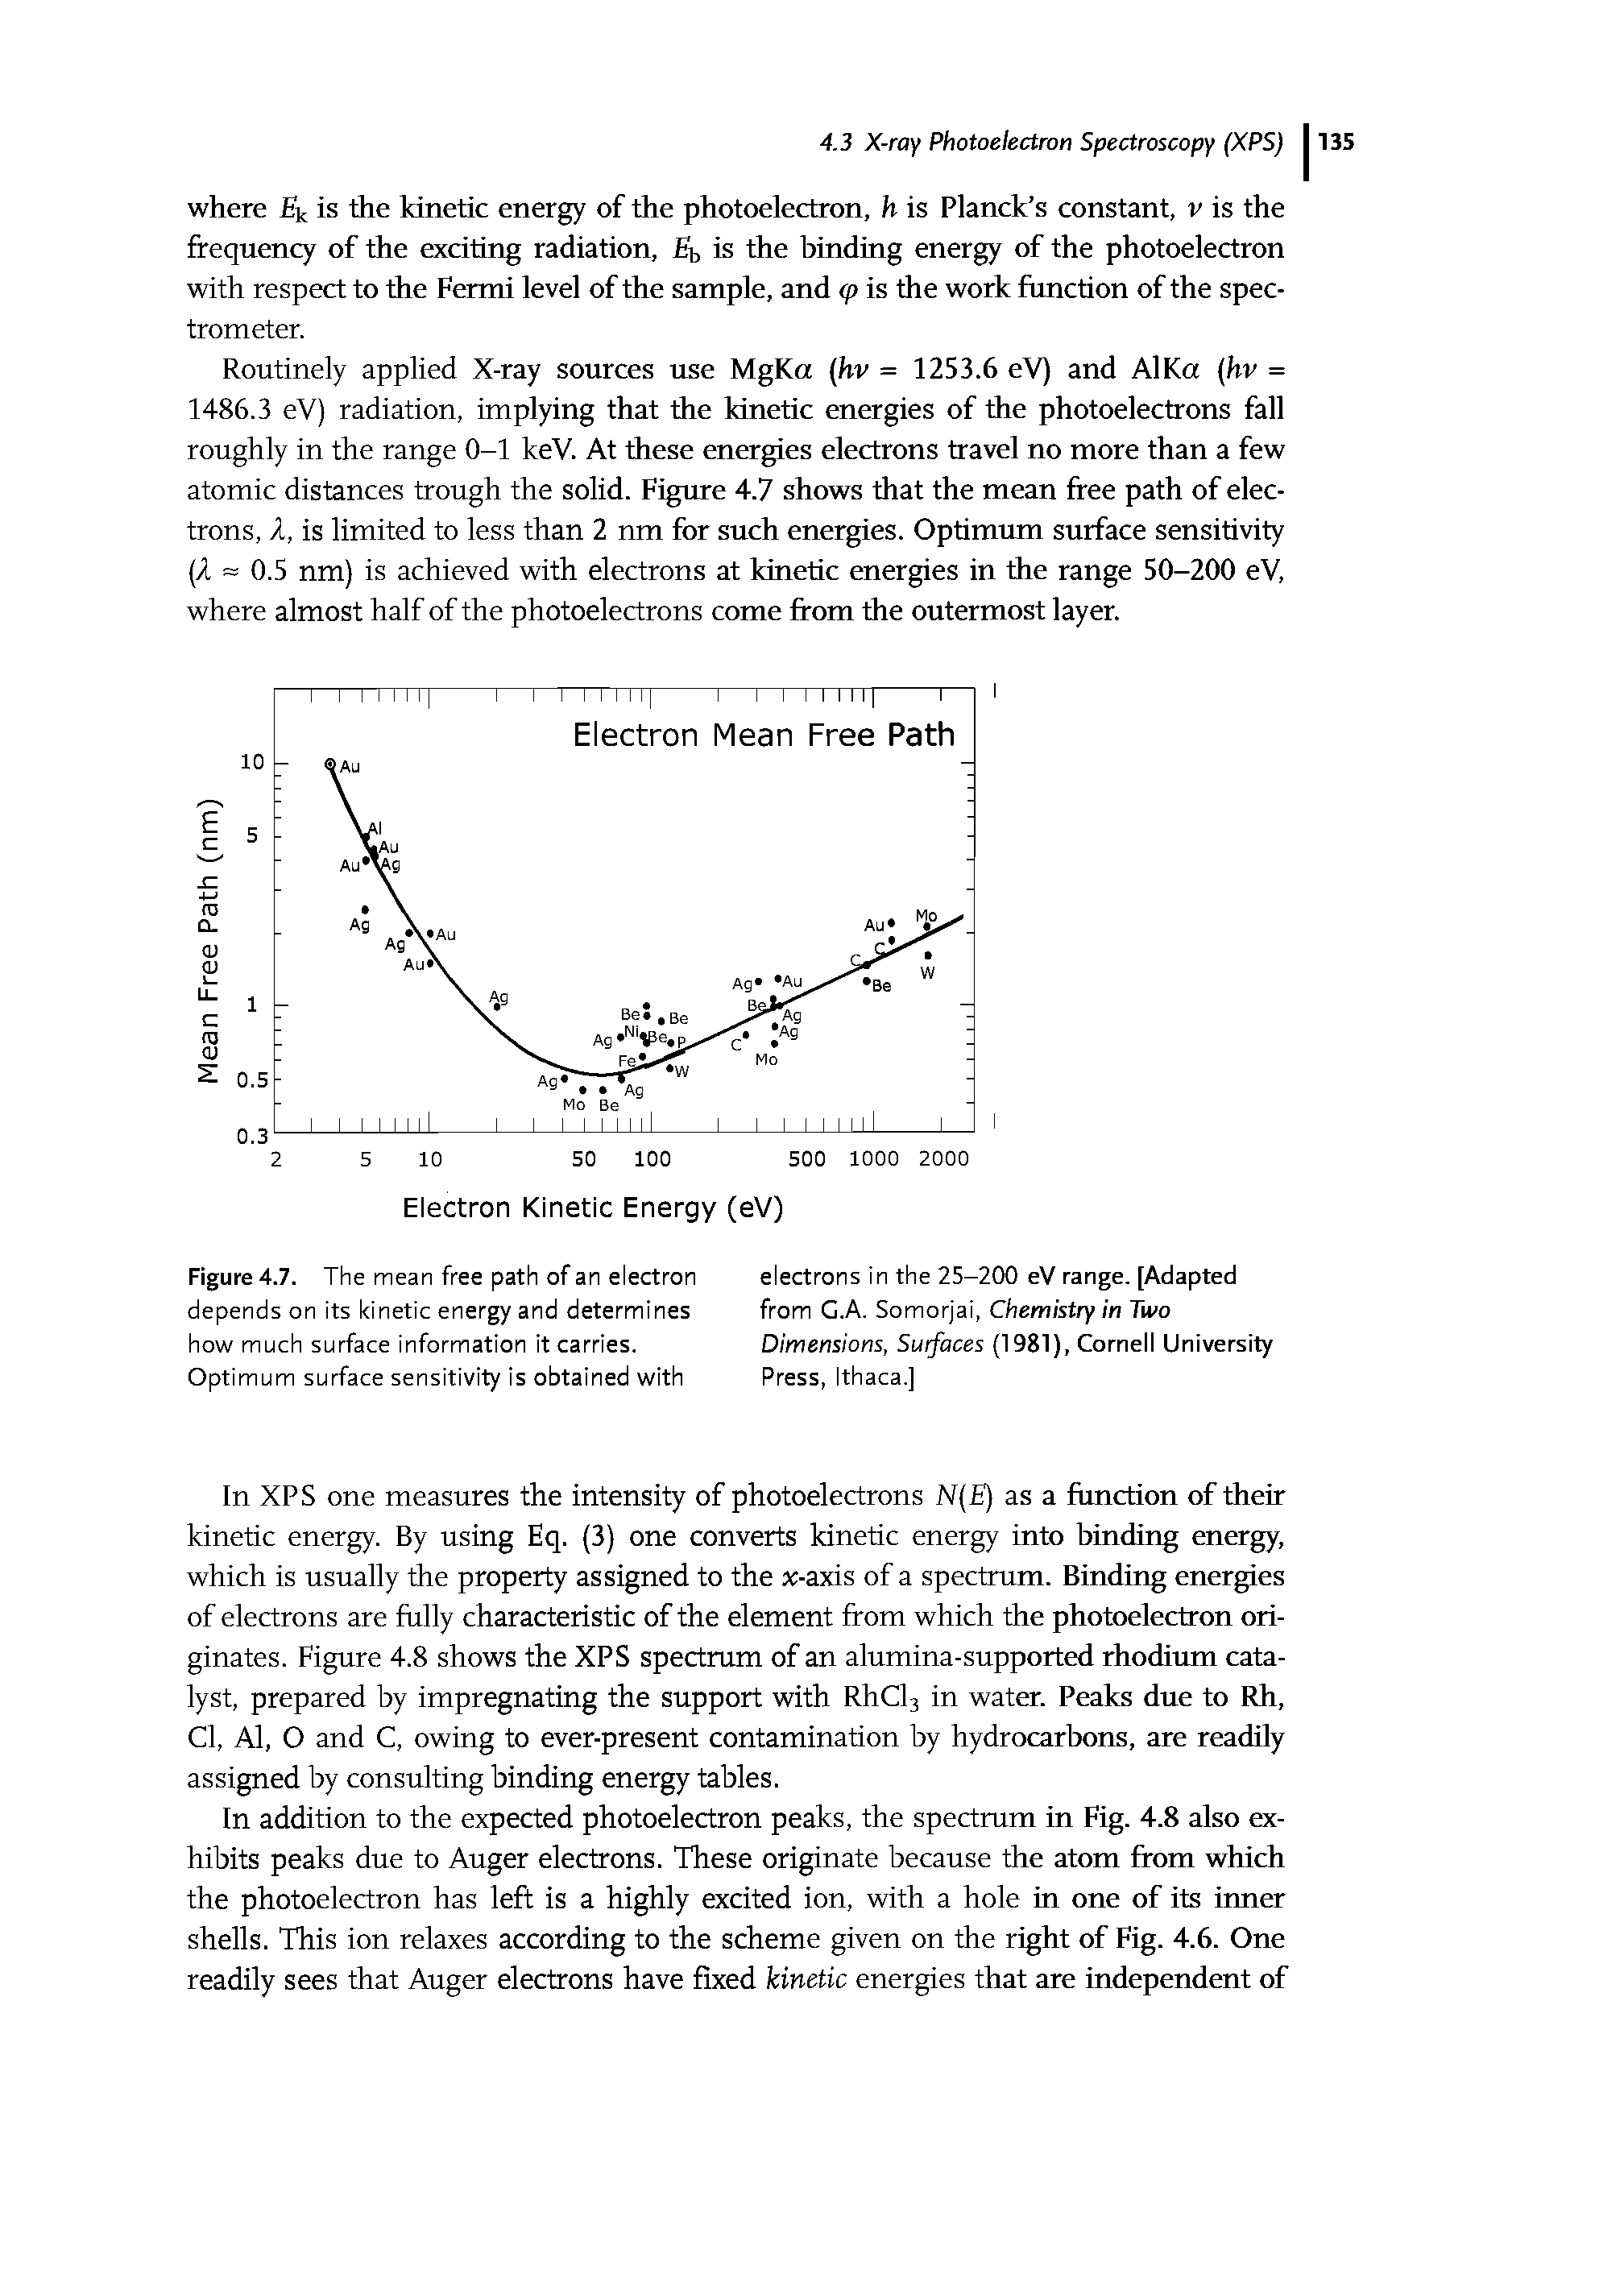 Figure 4.7. The mean free path of an electron depends on its kinetic energy and determines how much surface information it carries. Optimum surface sensitivity is obtained with...